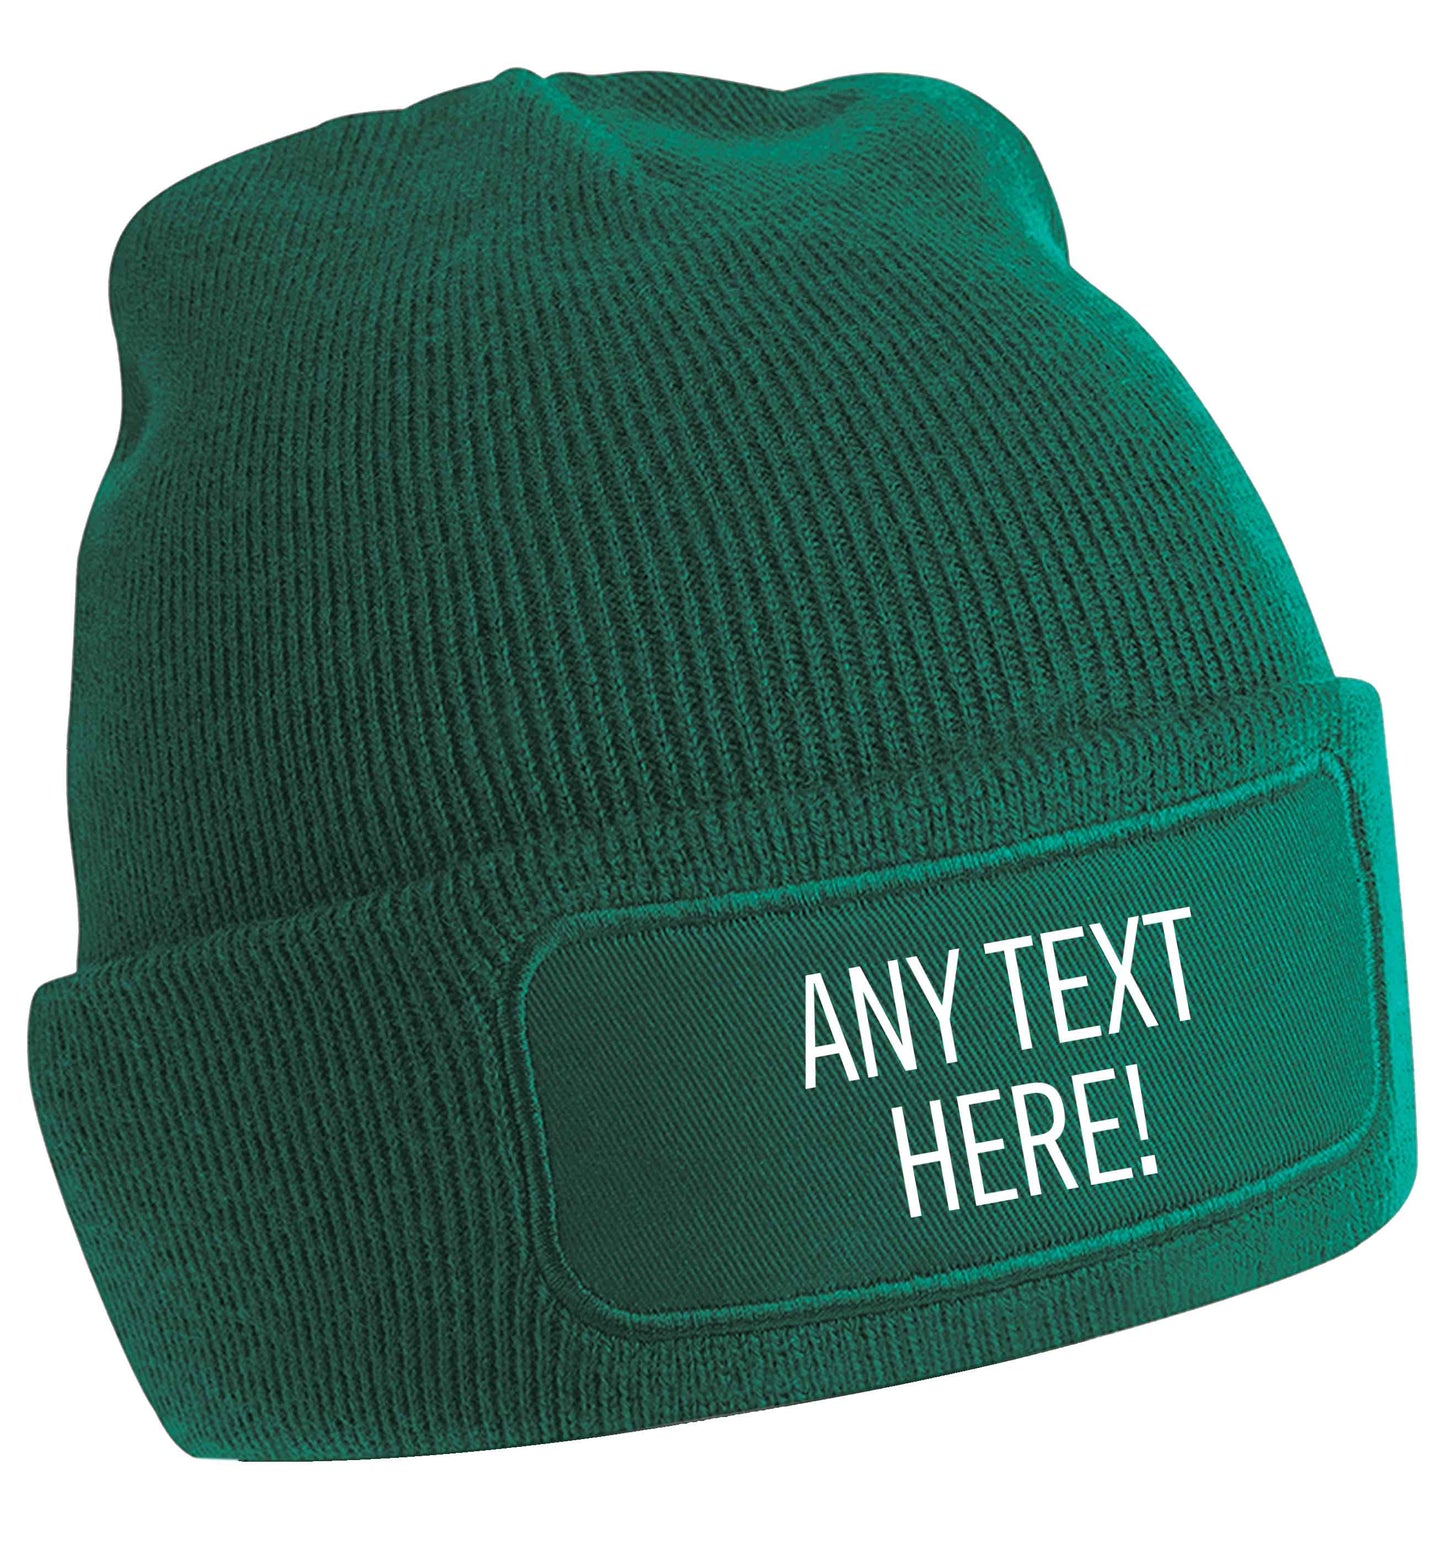 Any text here | Beanie hat | Custom order any text colour and font